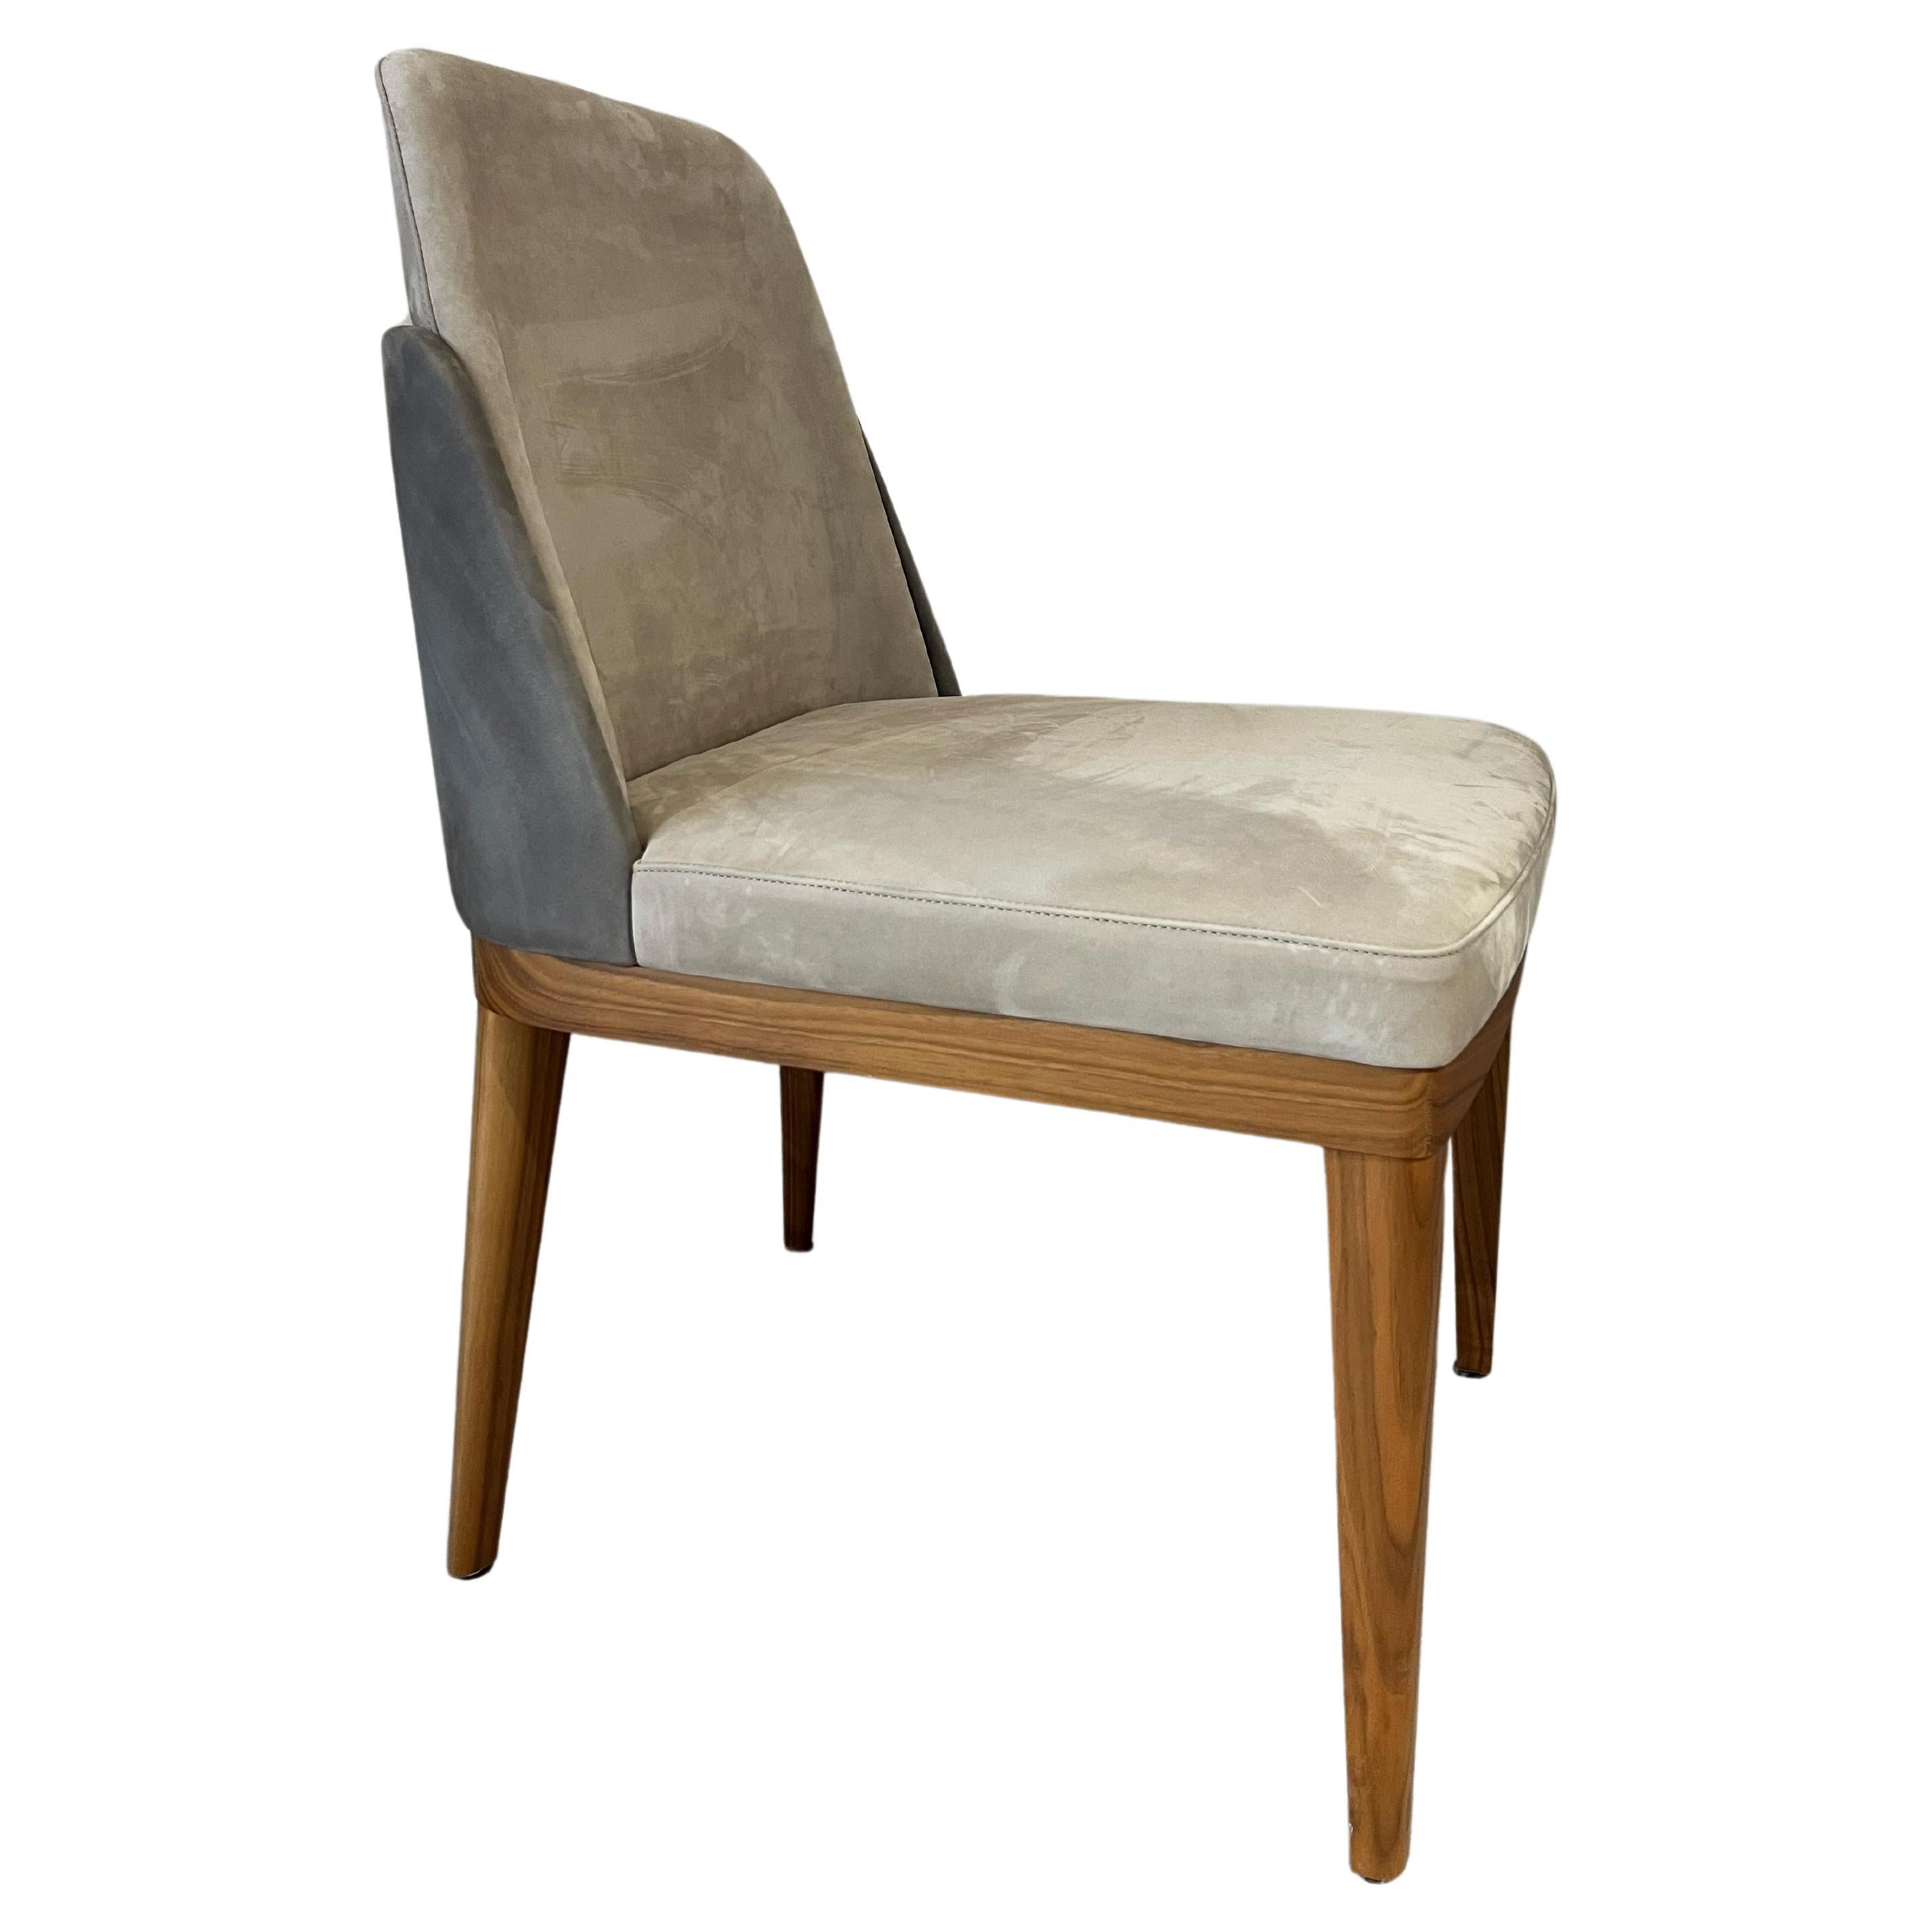 Nora nubuck leather and American walnut wood dining chair For Sale